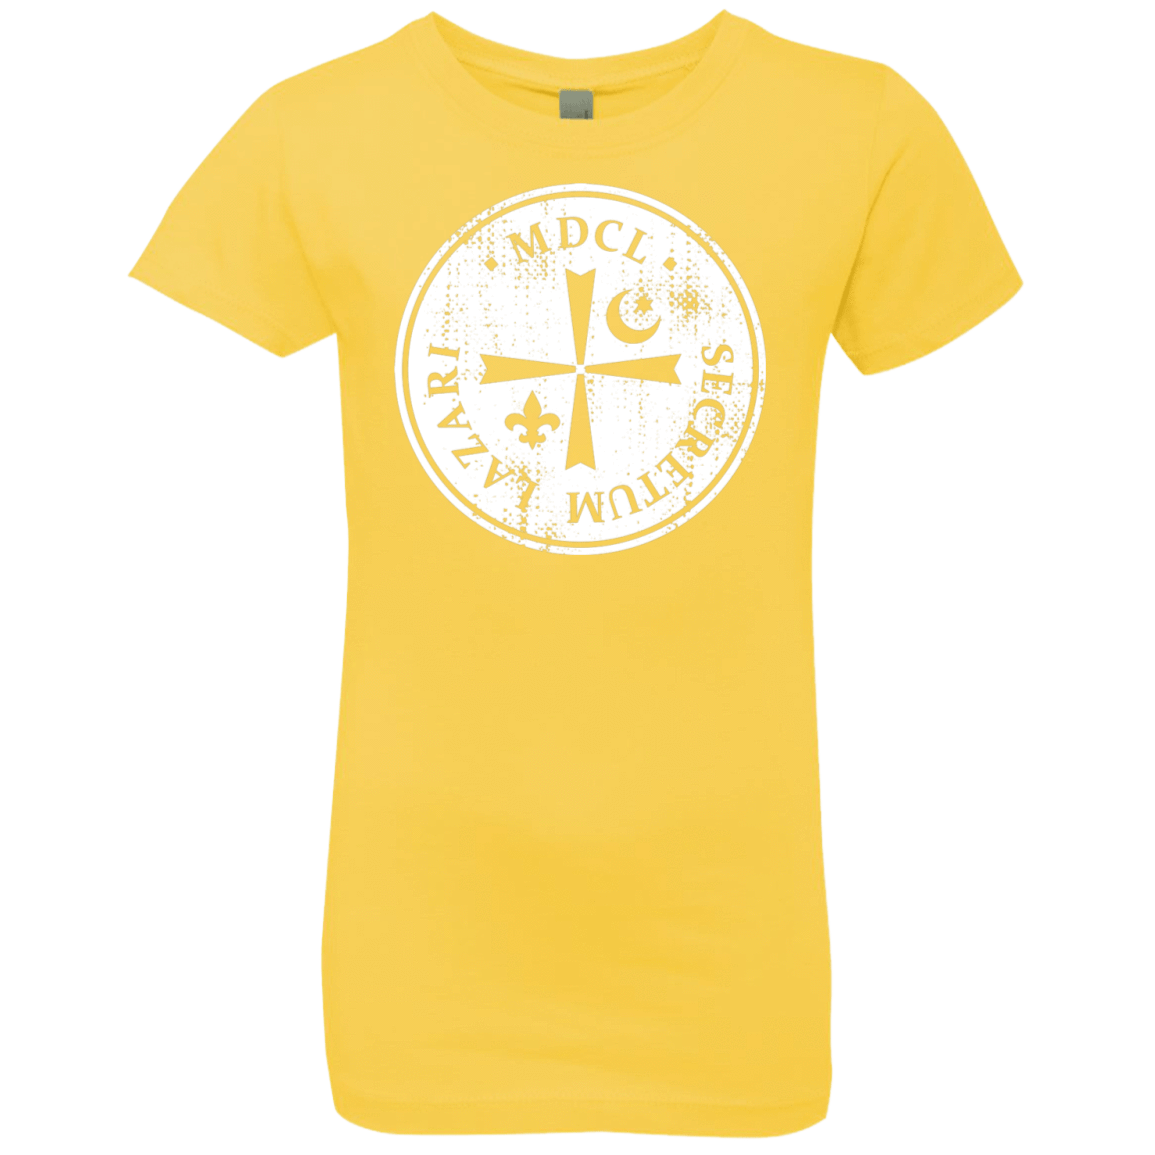 T-Shirts Vibrant Yellow / YXS A Discovery Of Witches Girls Premium T-Shirt